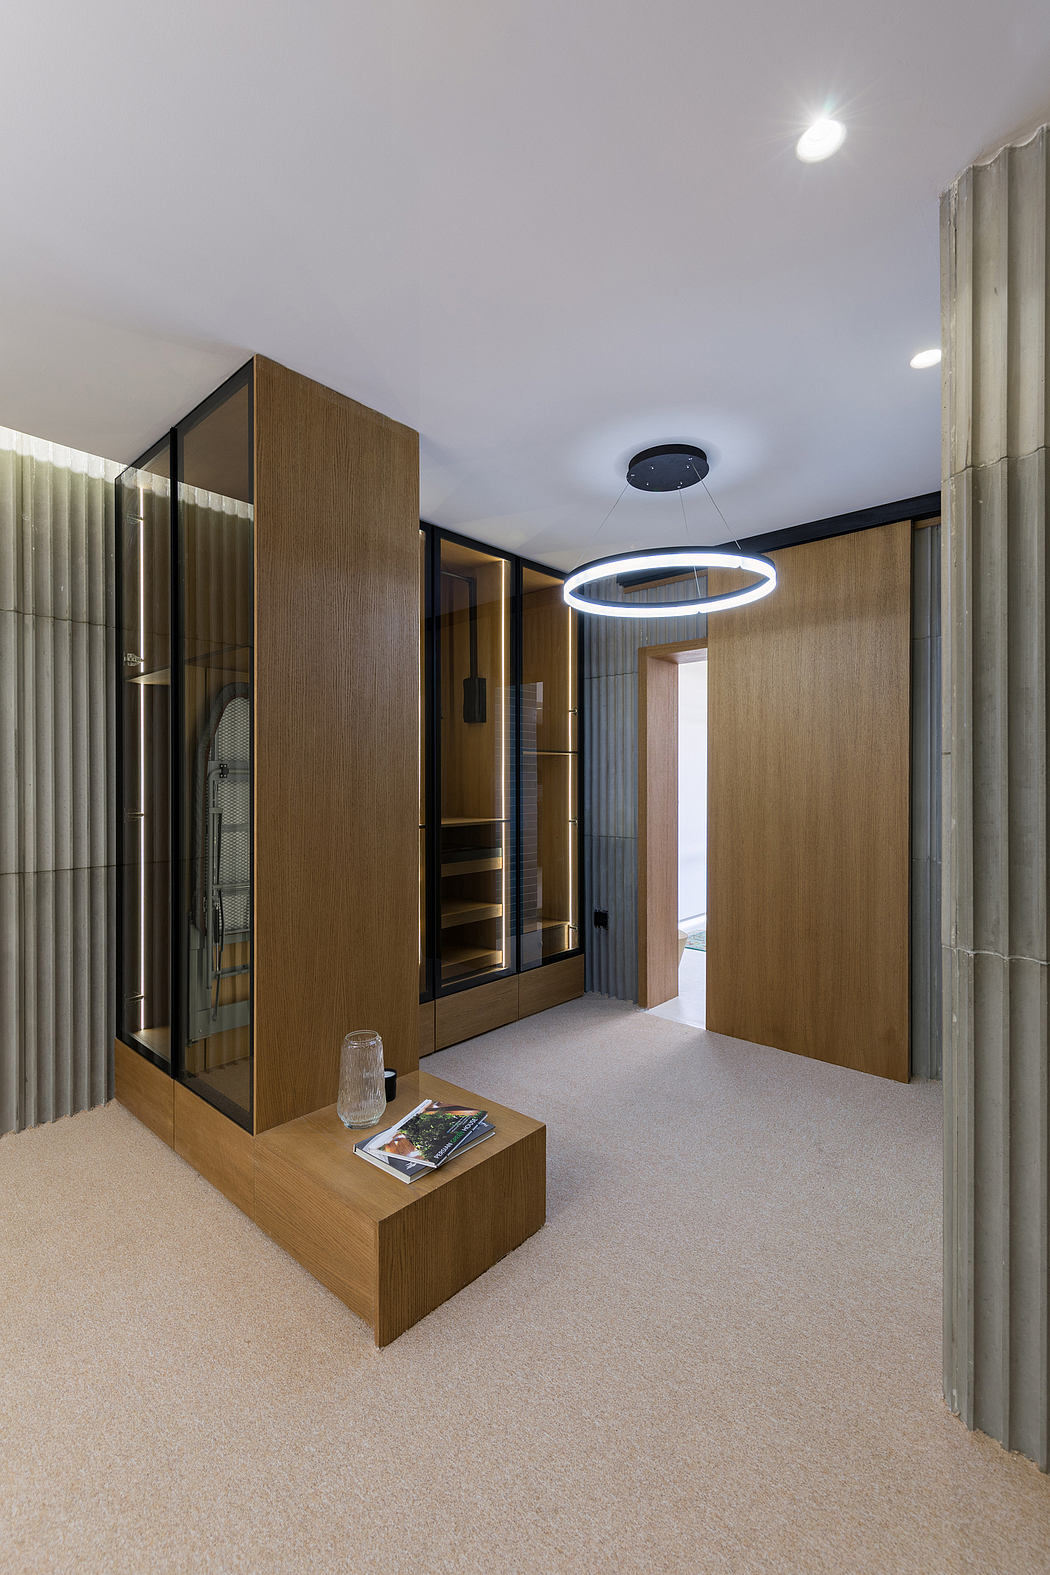 Sleek and modern interior design with wooden panels, glass elements, and a circular light fixture.